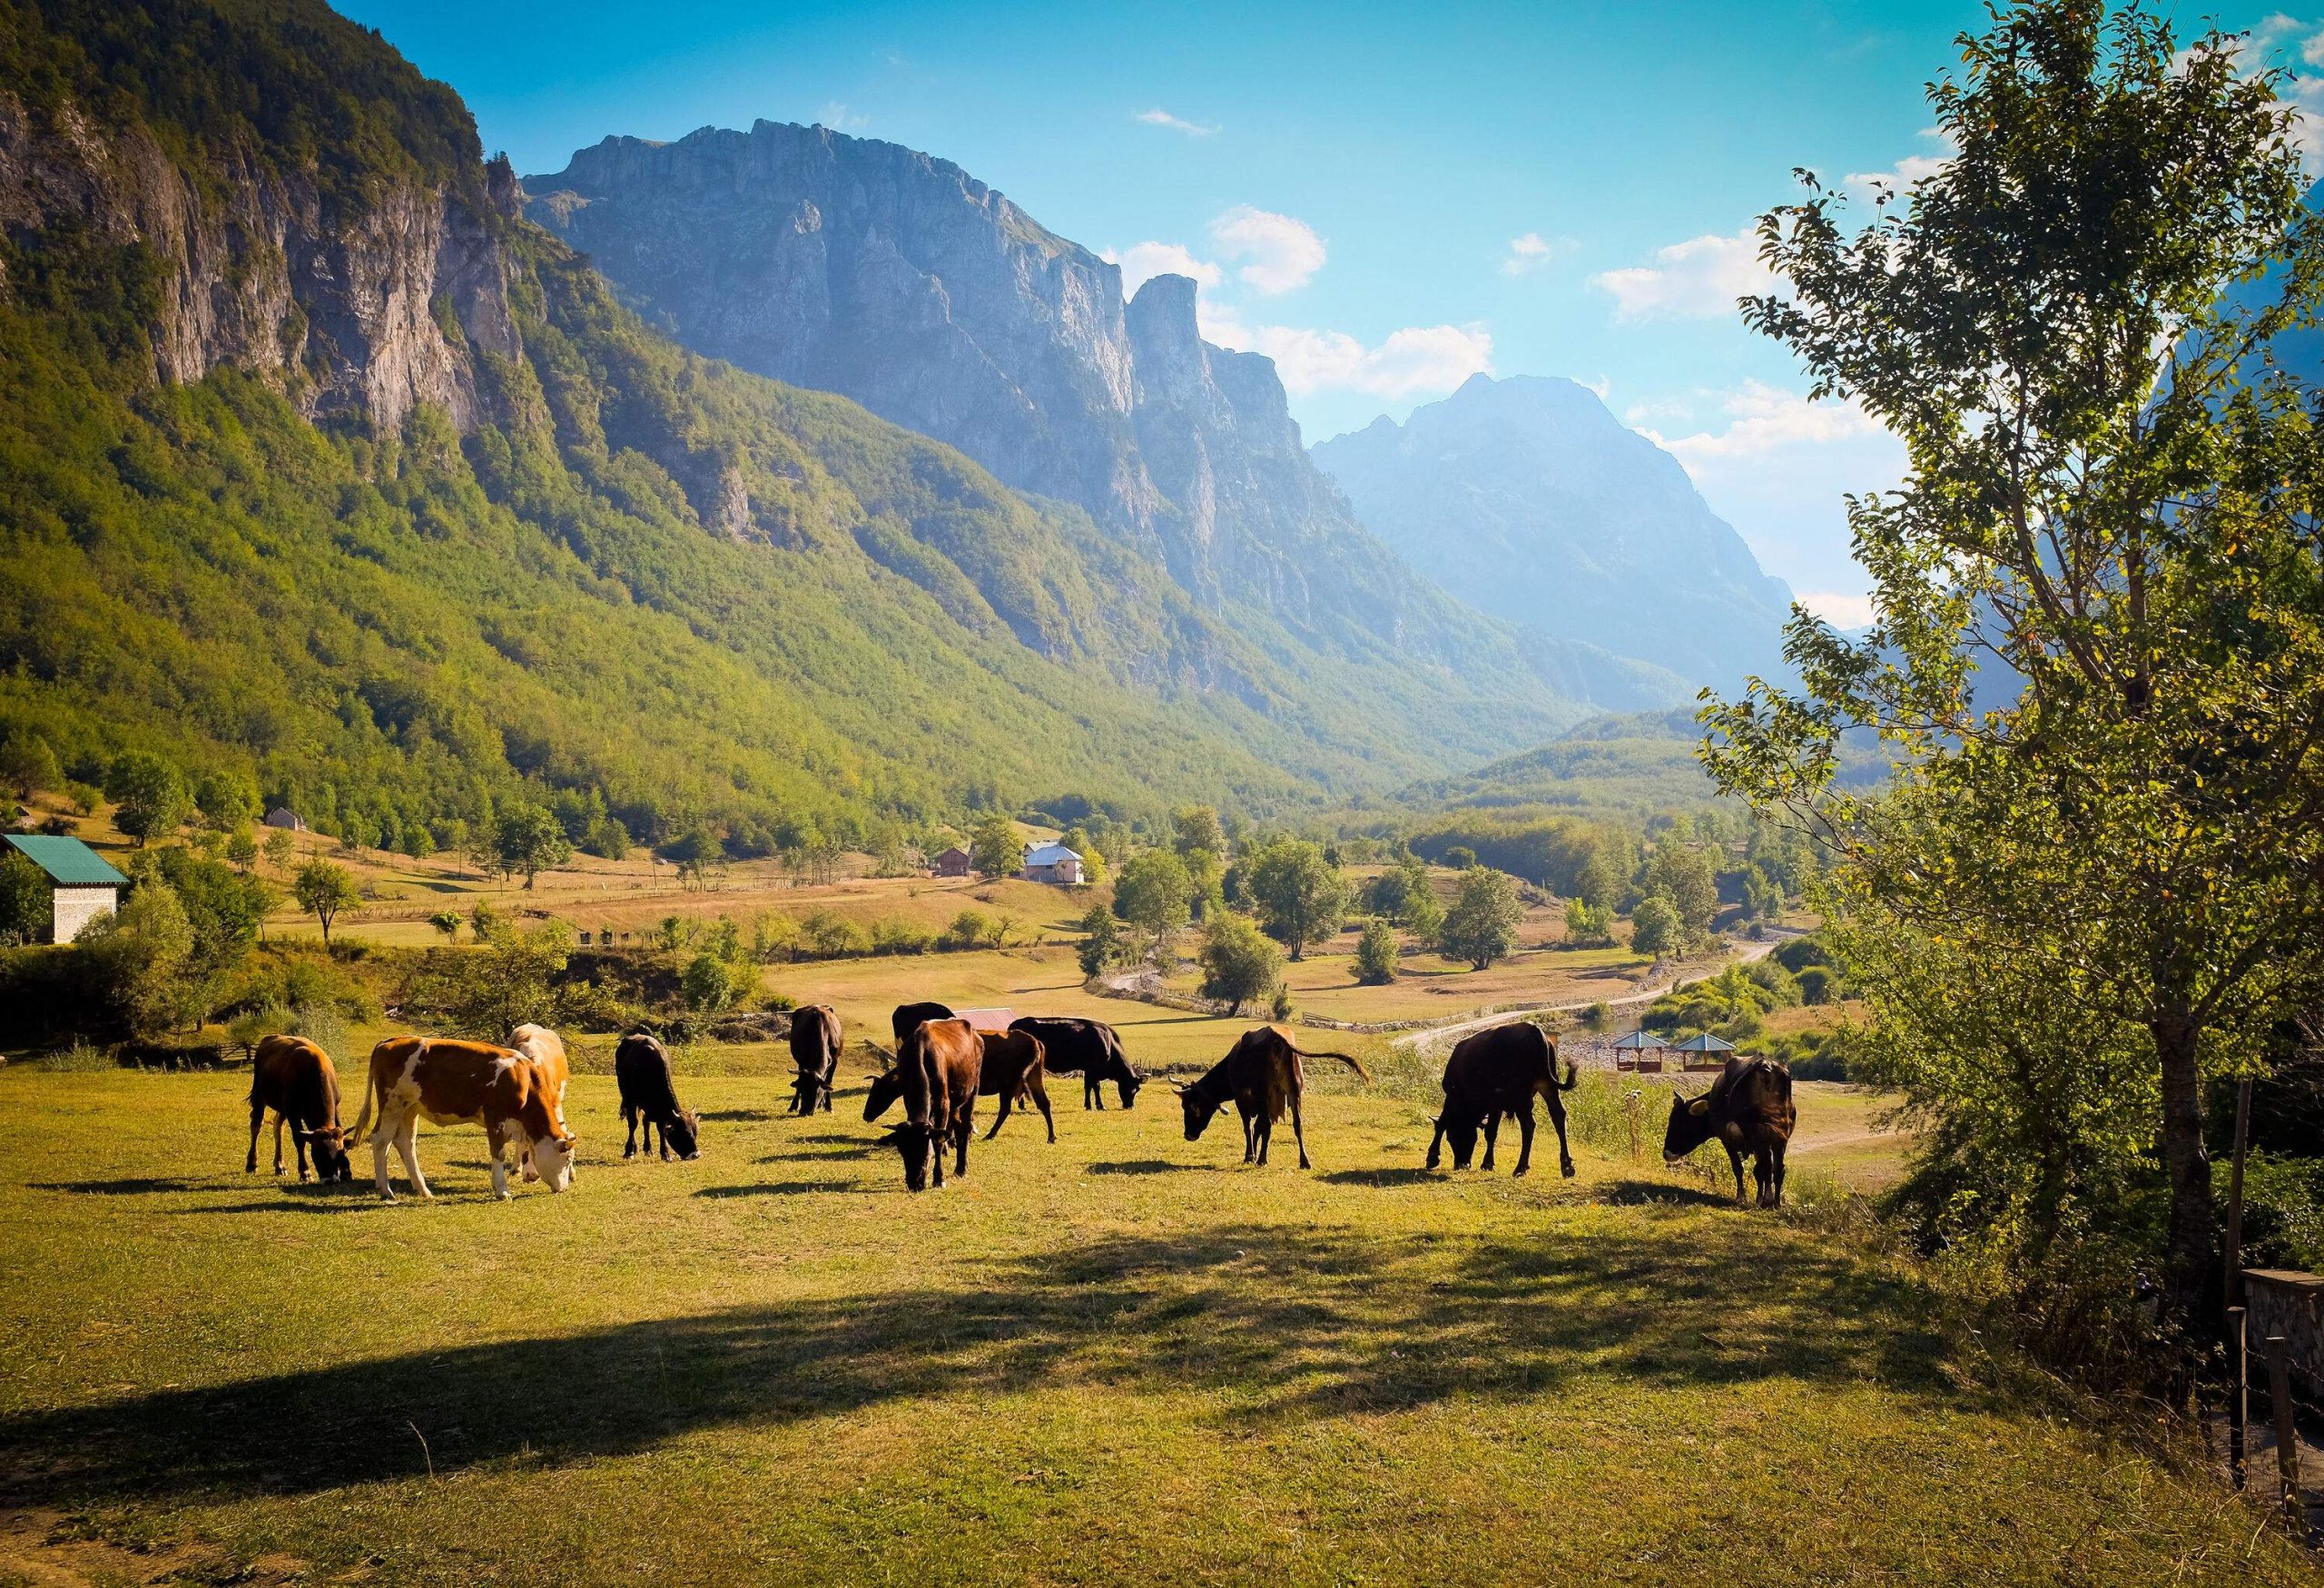 A herd of cows grazing on a green pasture with distant views of a forest at the base of a steep mountain range.